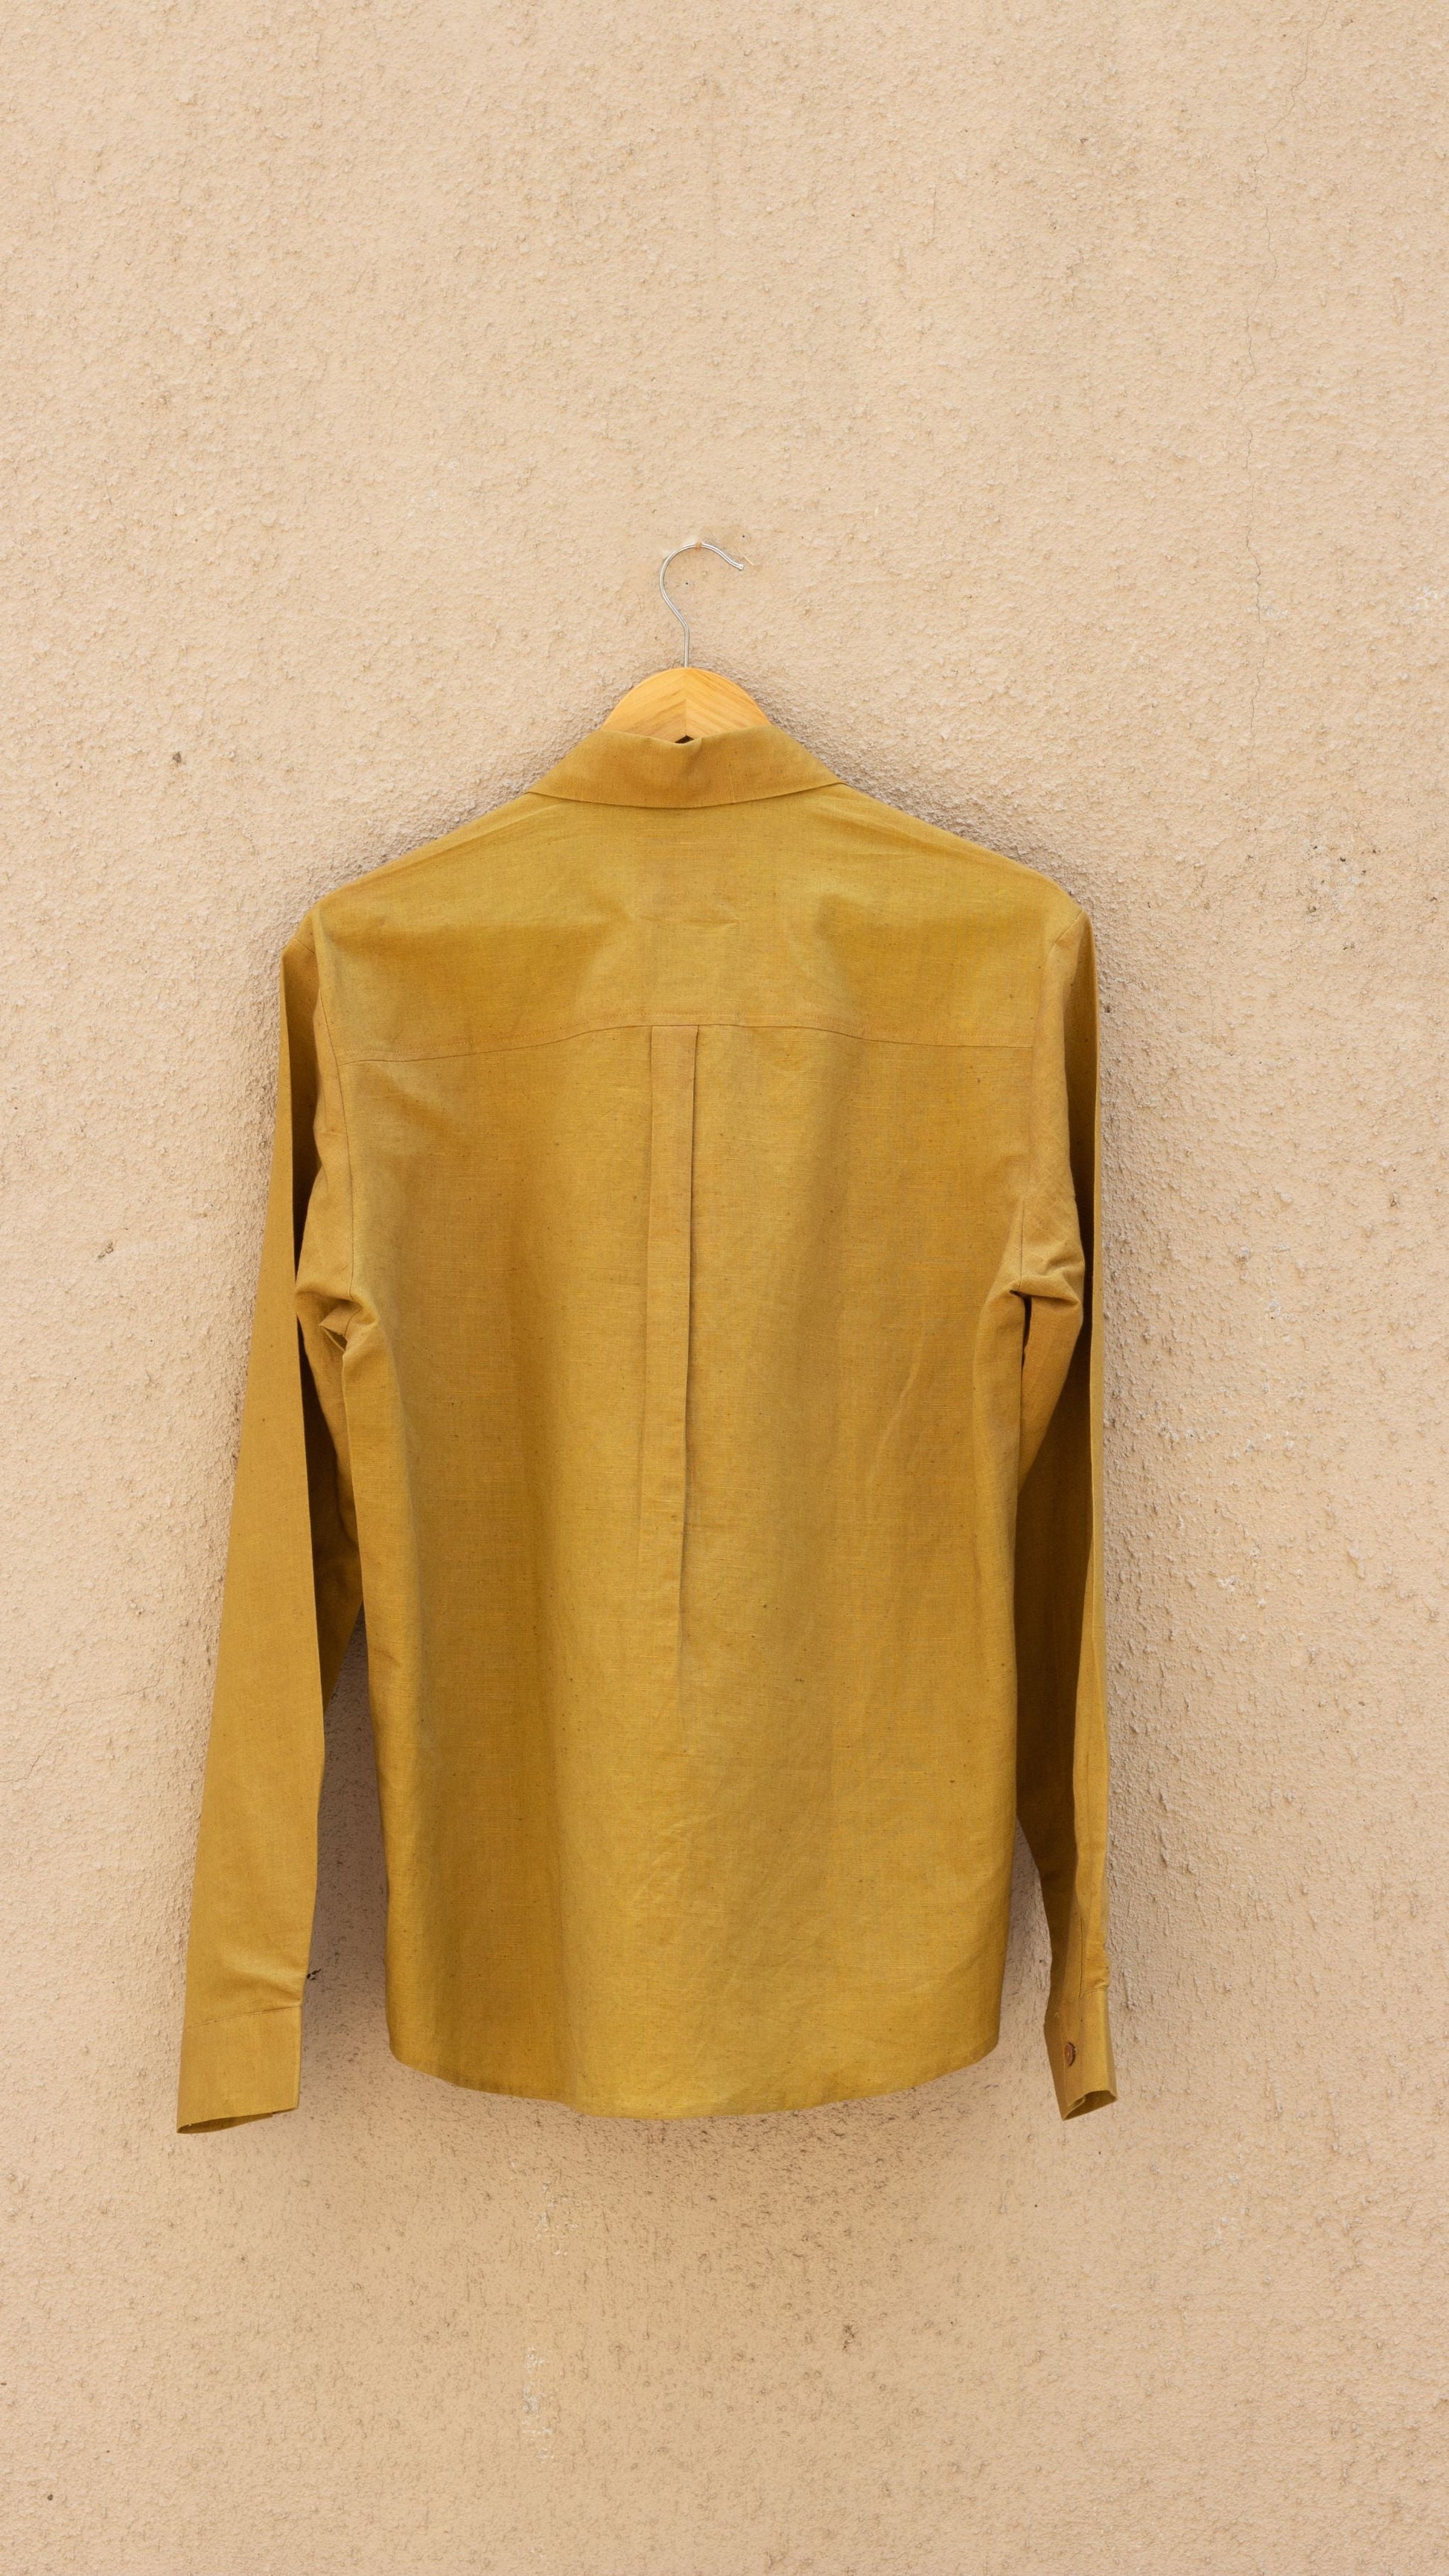 Yellow Cotton Shirt at Kamakhyaa by Anushé Pirani. This item is Best Selling, Casual Wear, Cotton, Cotton Hemp, For Him, Handwoven, Hemp, Menswear, Regular Fit, Shibumi Collection, Shirts, Solids, Tops, Yellow